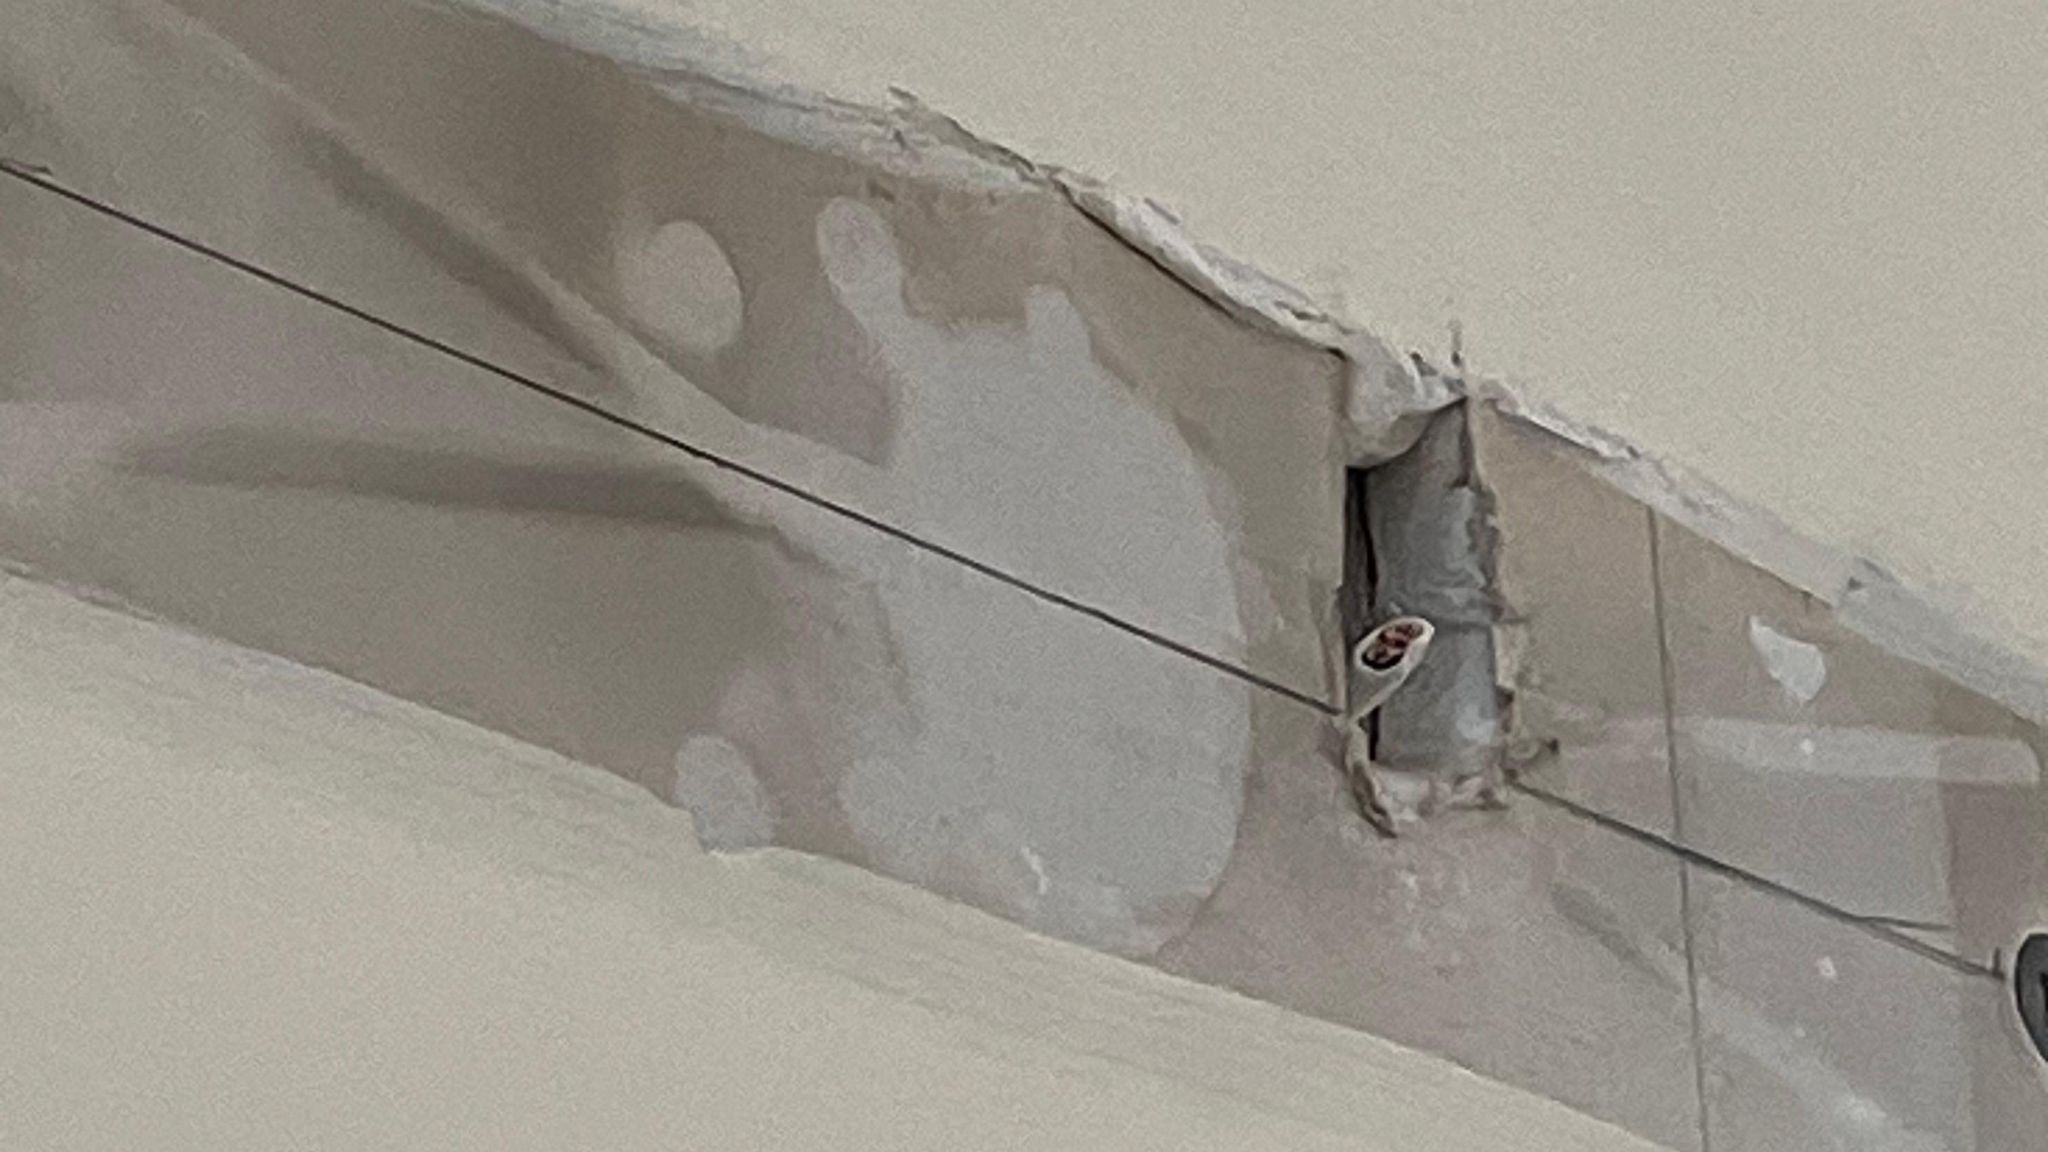 A gap in plaster shows a cut wire sticking out